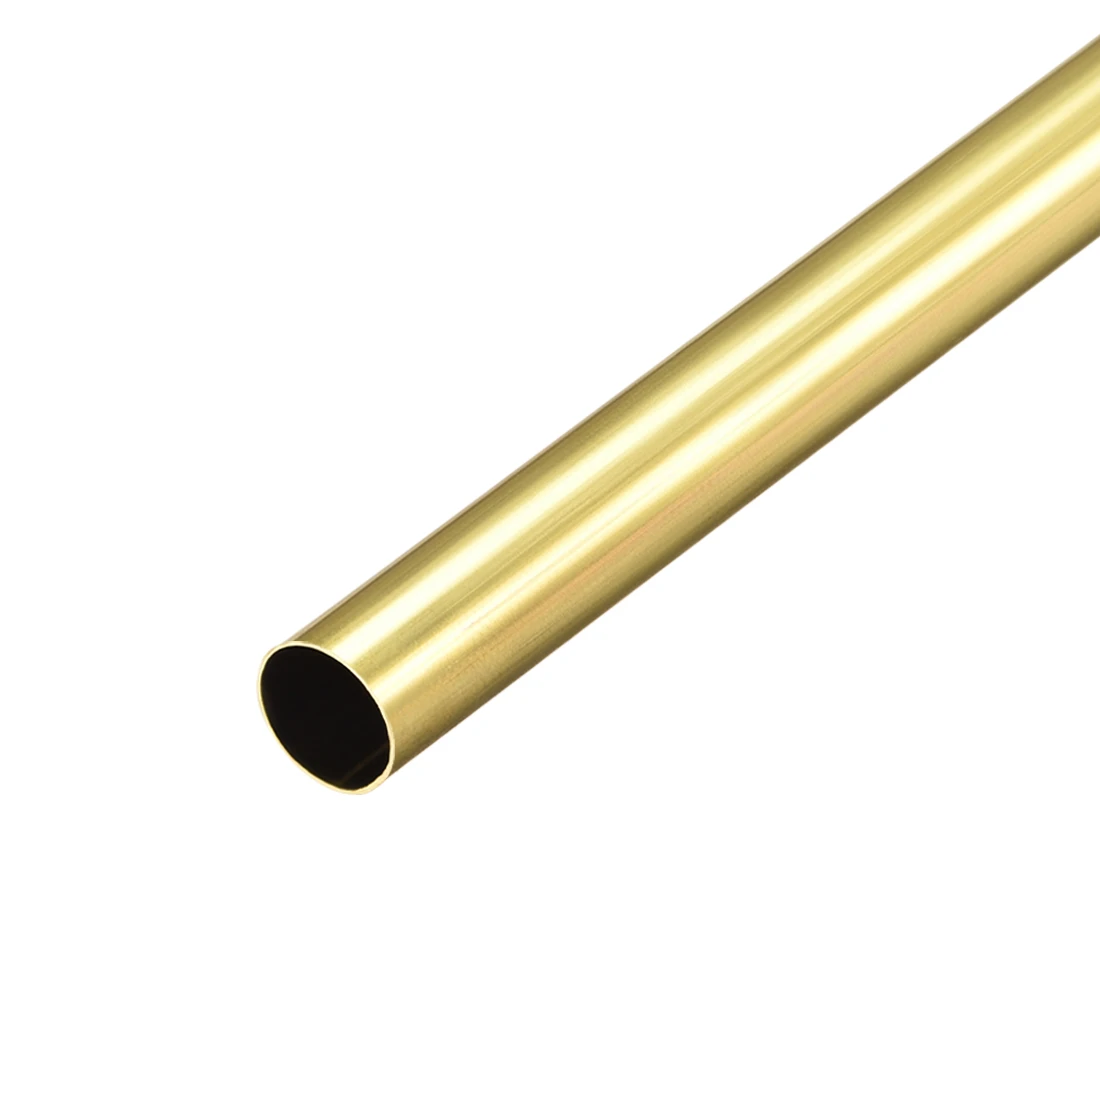 Round Brass Tube 300 mm Length 8 mm OD 1 mm Wall Thickness Seamless Straight Pipe Tube 2 Pieces 